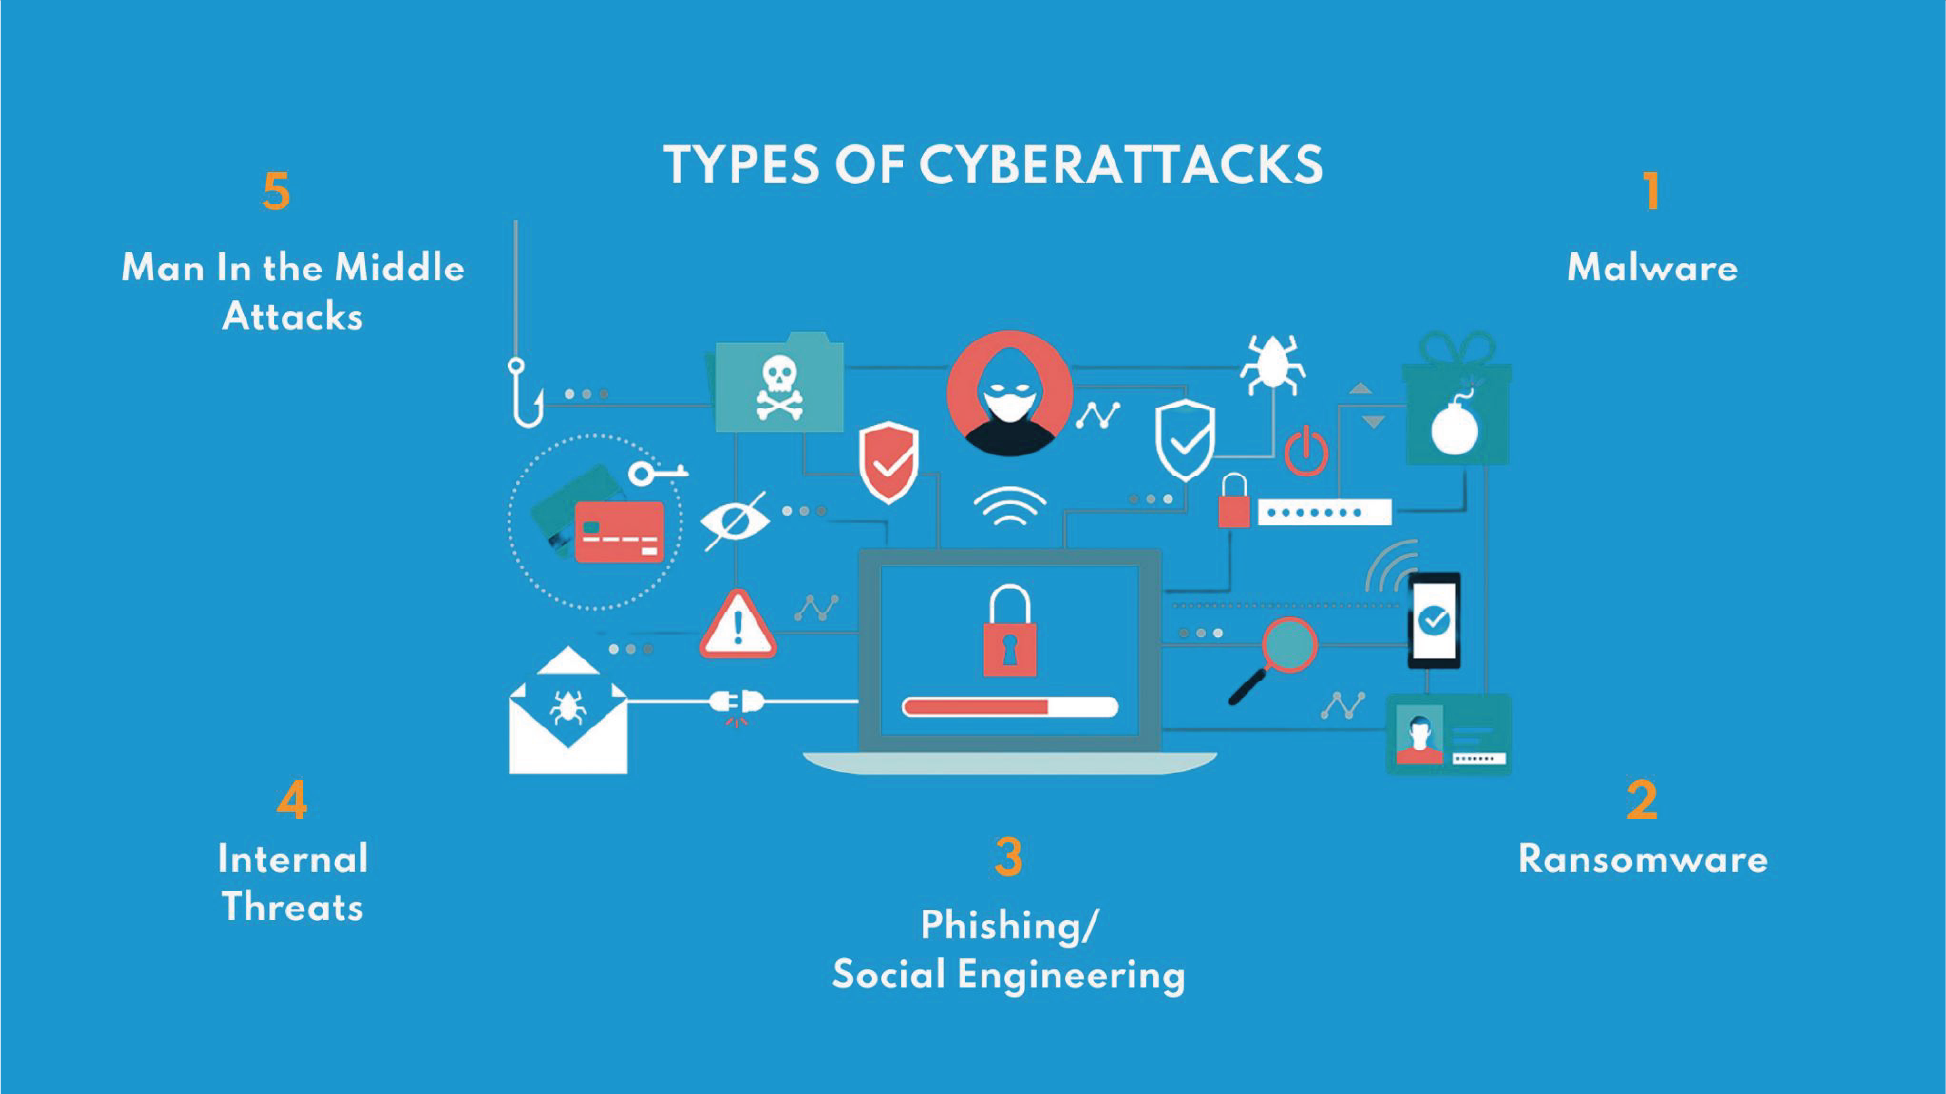 Graphic image of different cyberattacks with the words "Types of Cyberattacks" across the top. The types of cyberattacks are displayed on the page around the cyberattack graphics. On the top right, "1 Malware", bottom right, "2 Ransomware", bottom center, "Phishing/Social/Engineering", bottom left "4 Internal Threats", top left, "5 Man In the Middle Attacks"